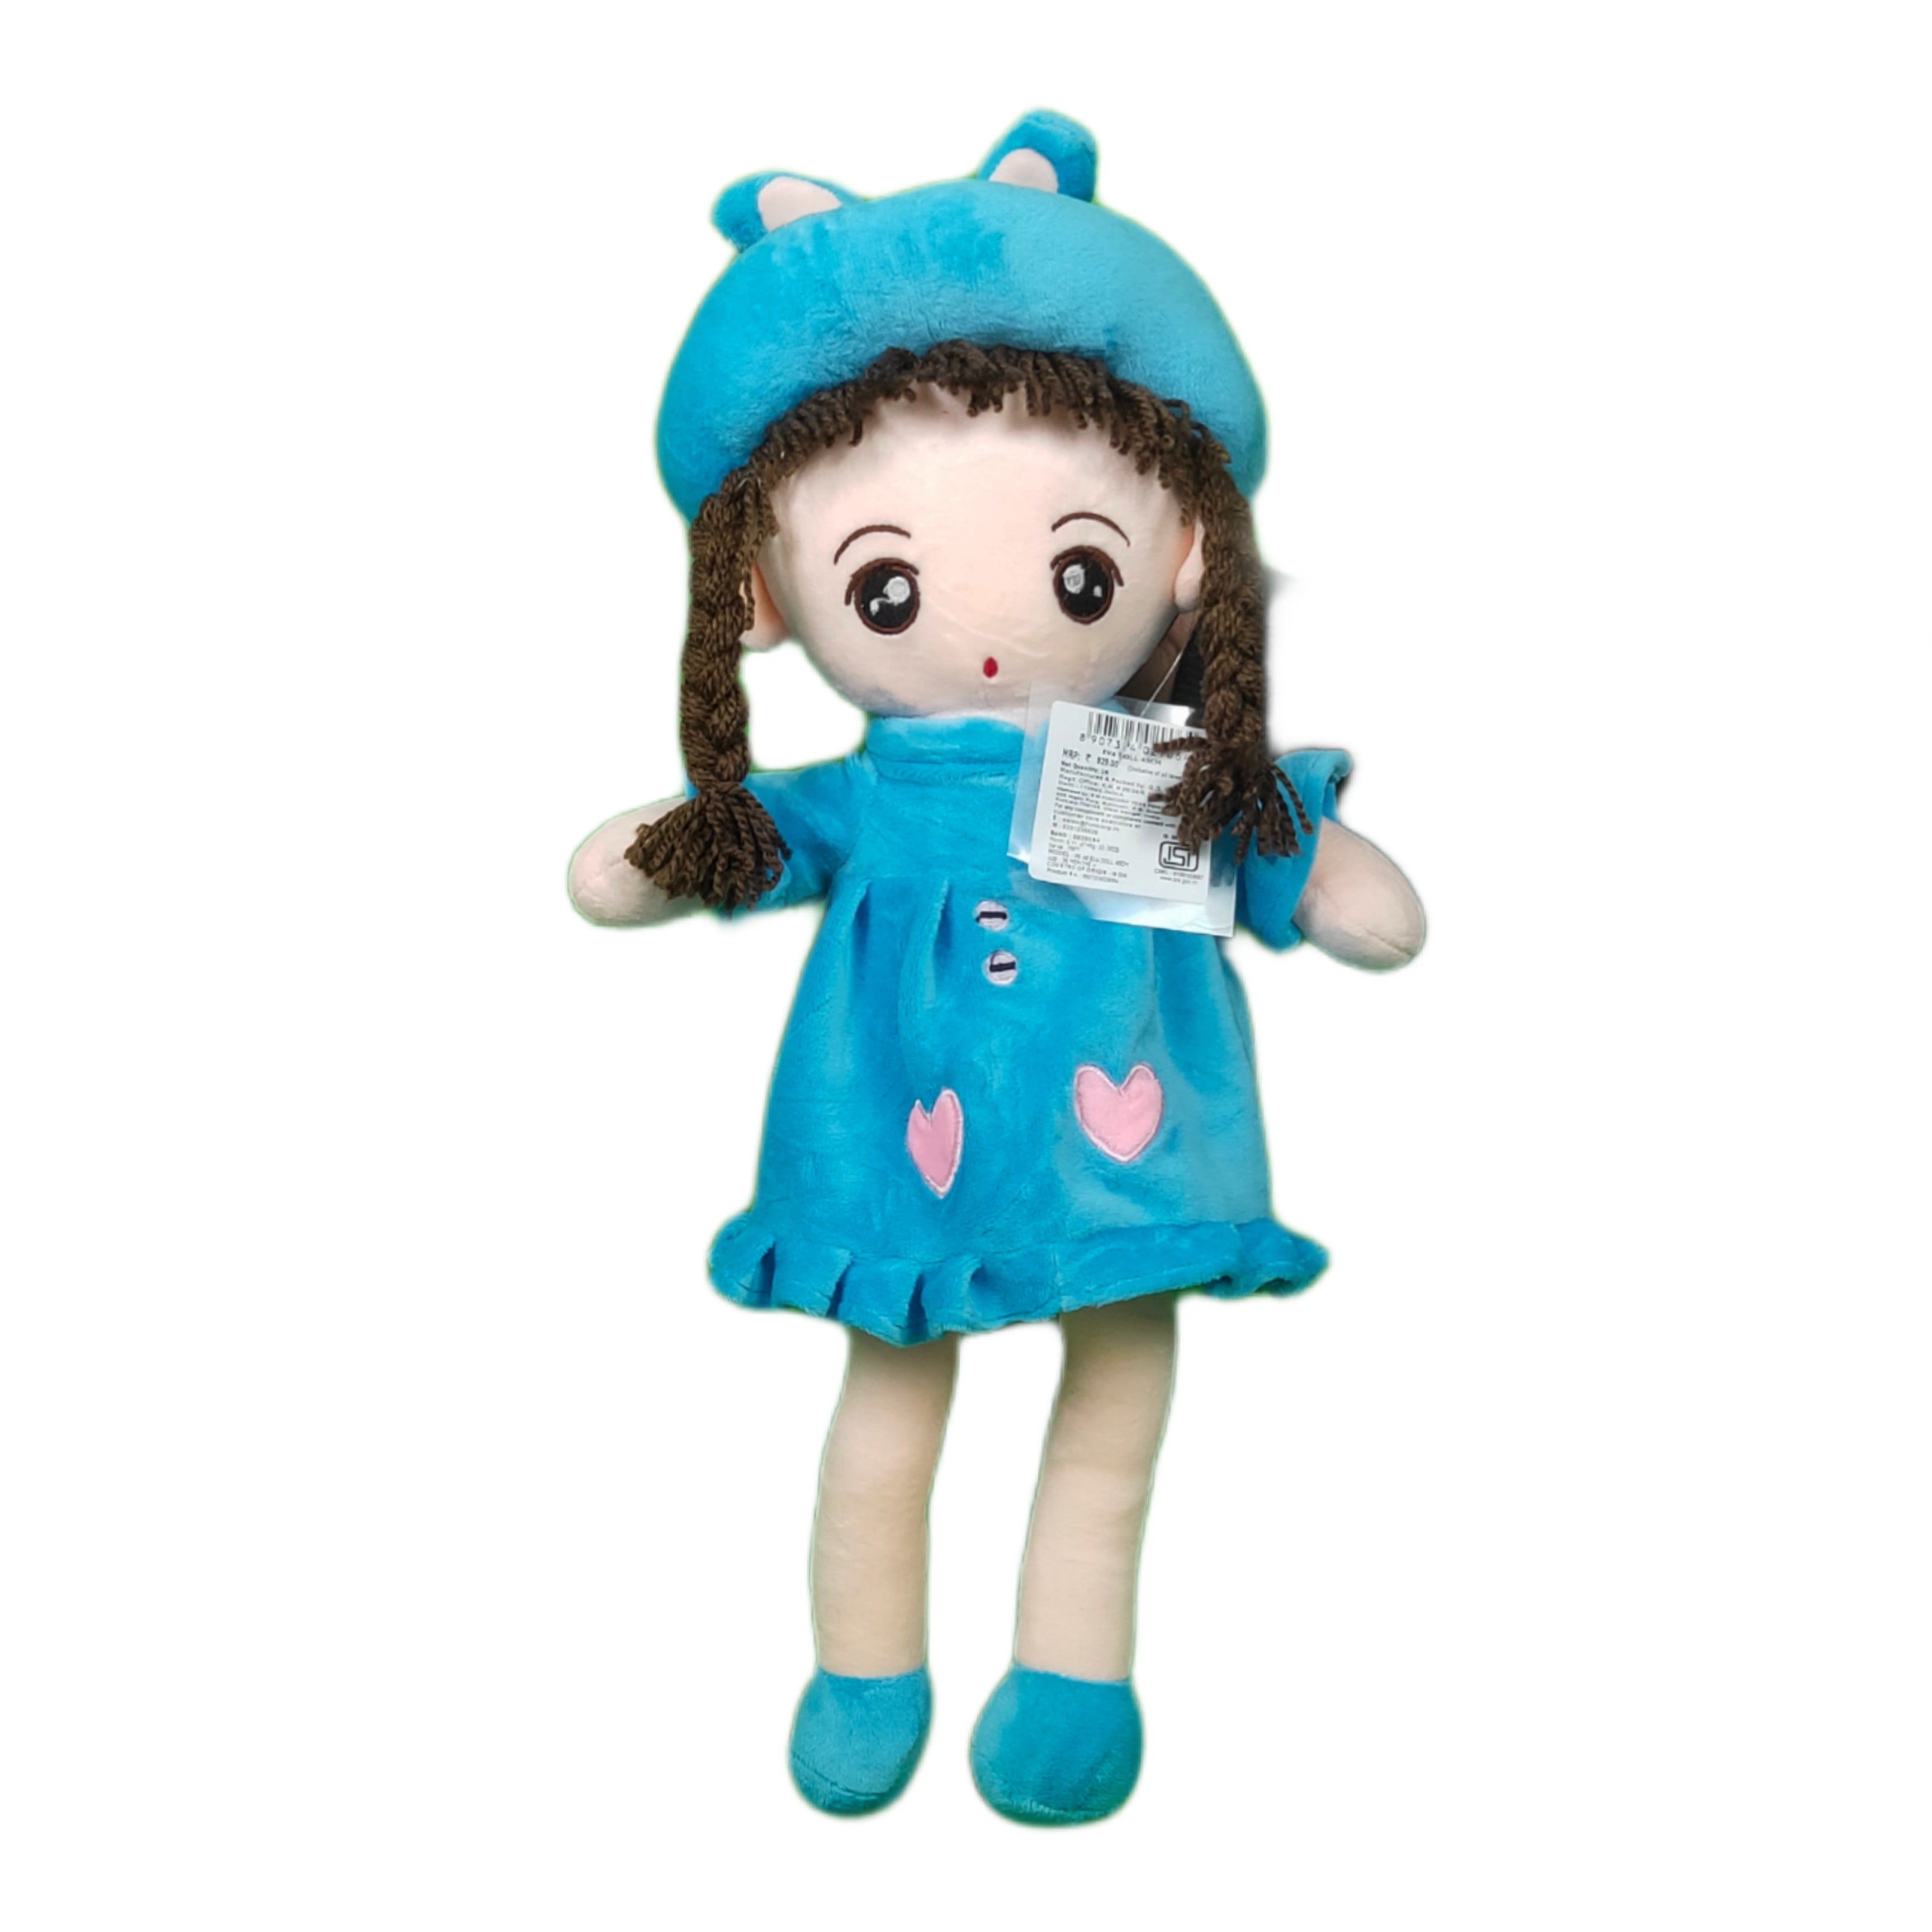 Play Hour Eva Rag Doll Plush Soft Toy Wearing Blue Frock for Ages 3 Years and Up, 45cm